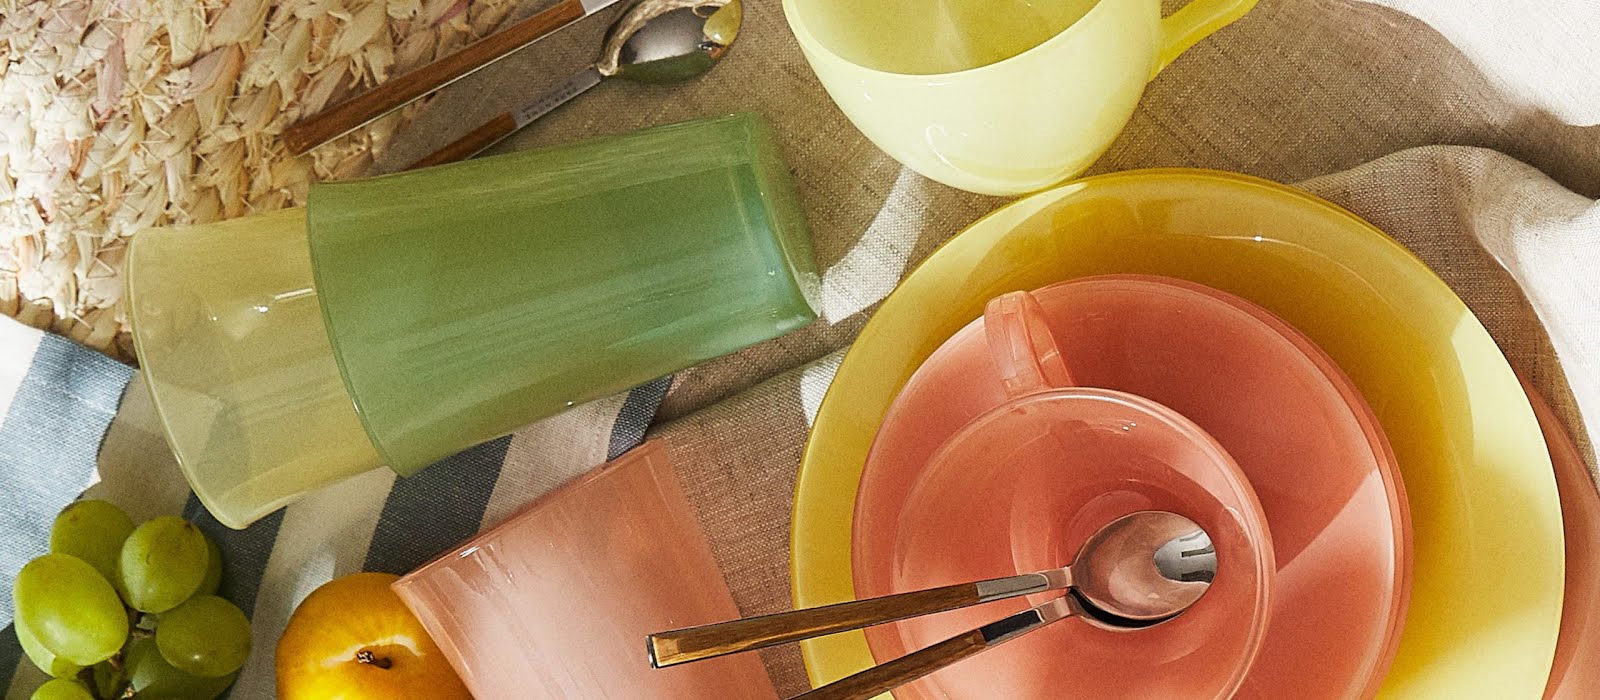 These 30 kitchen buys under €30 are the perfect way to brighten up your at-home dining